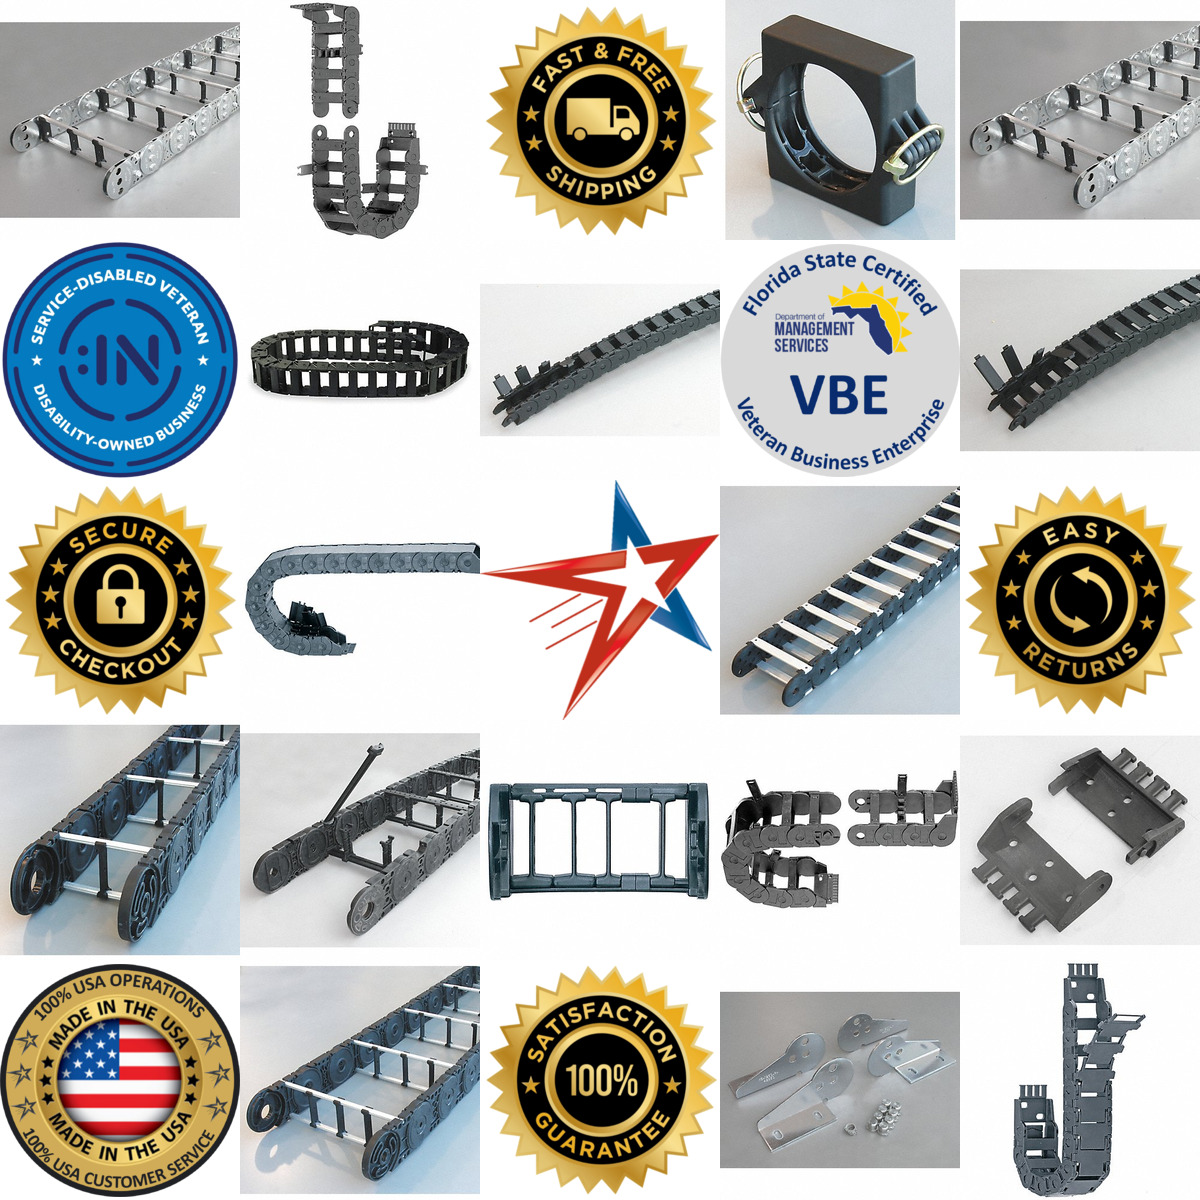 A selection of Cable Hose Carrier Systems products on GoVets